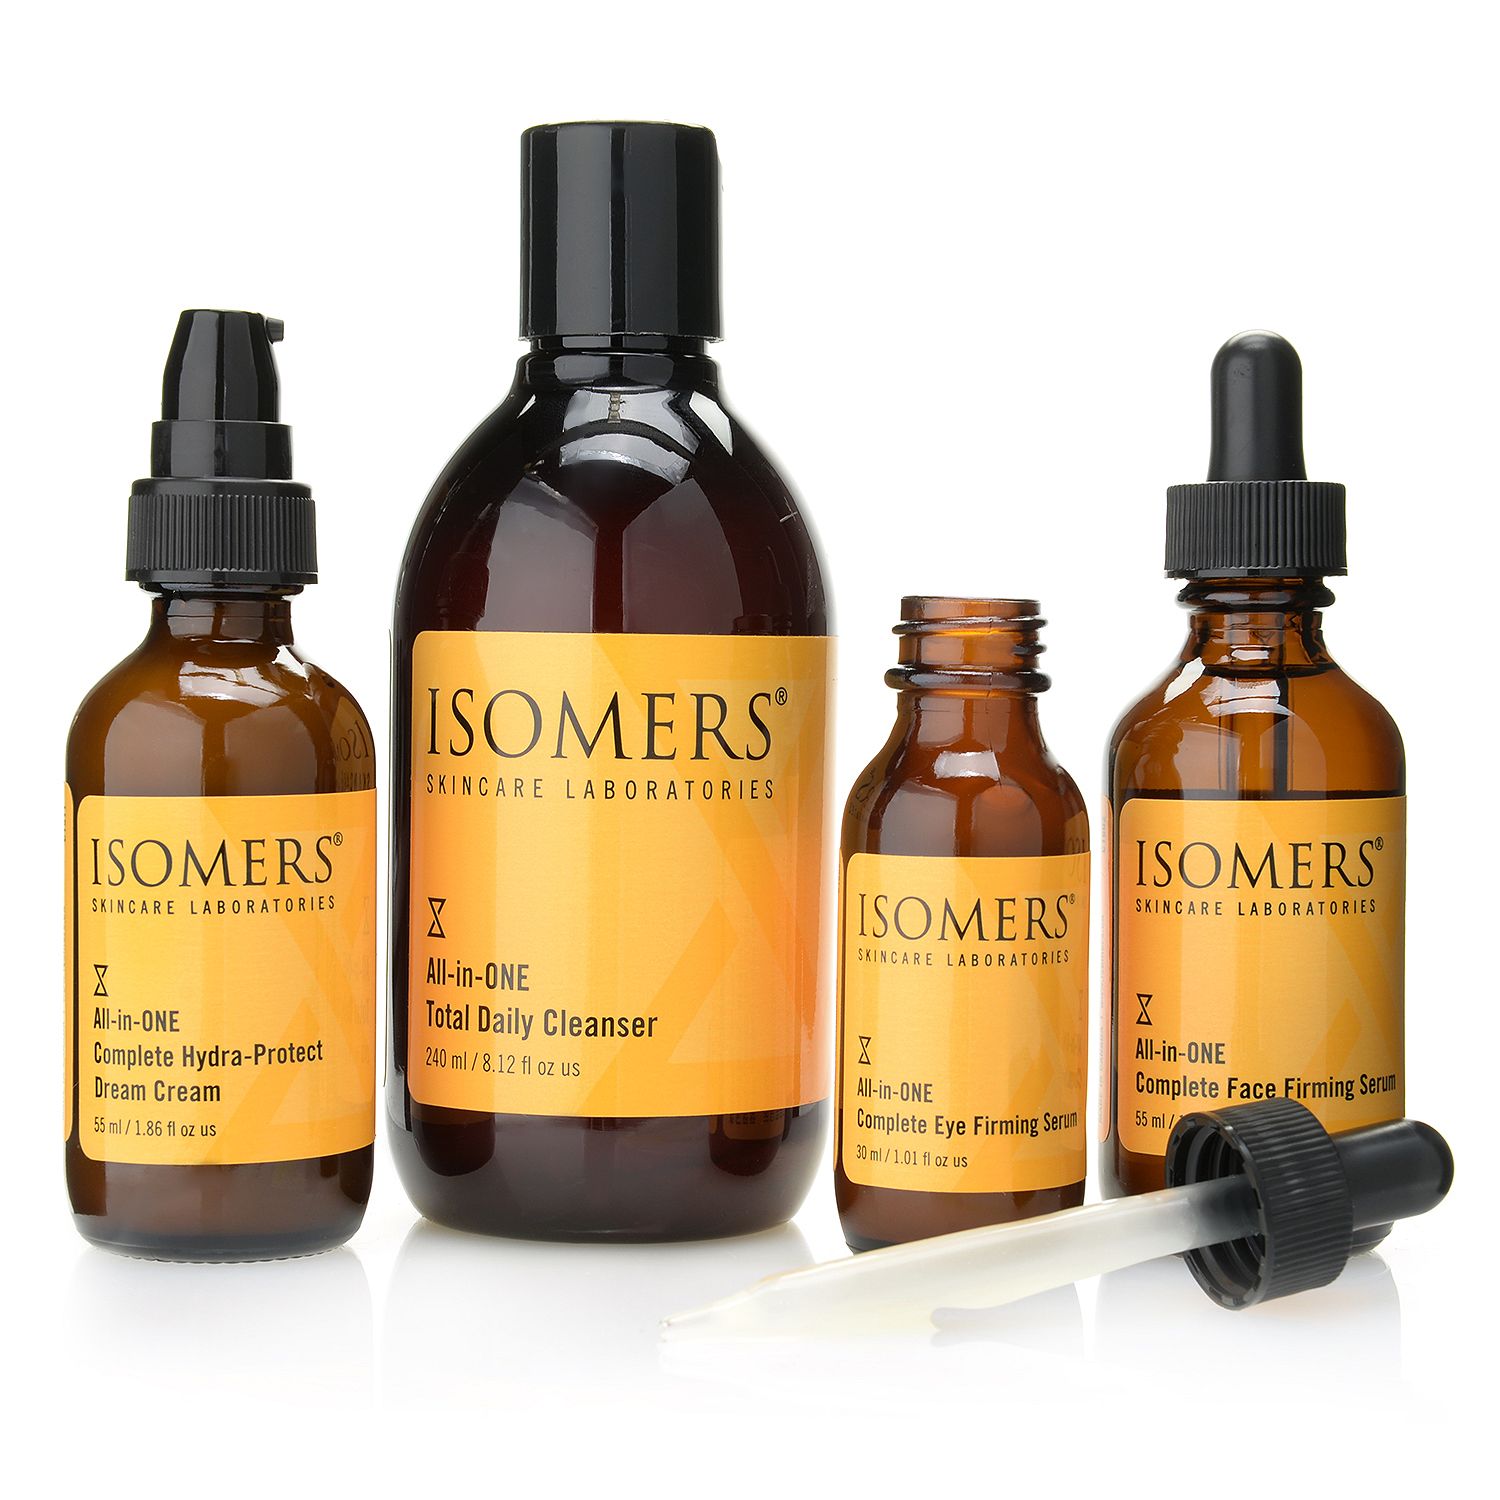 311-684- ISOMERS Skincare All-in-One "Let's Get Started" Four-Piece Anti-Aging Set for Face & Eyes